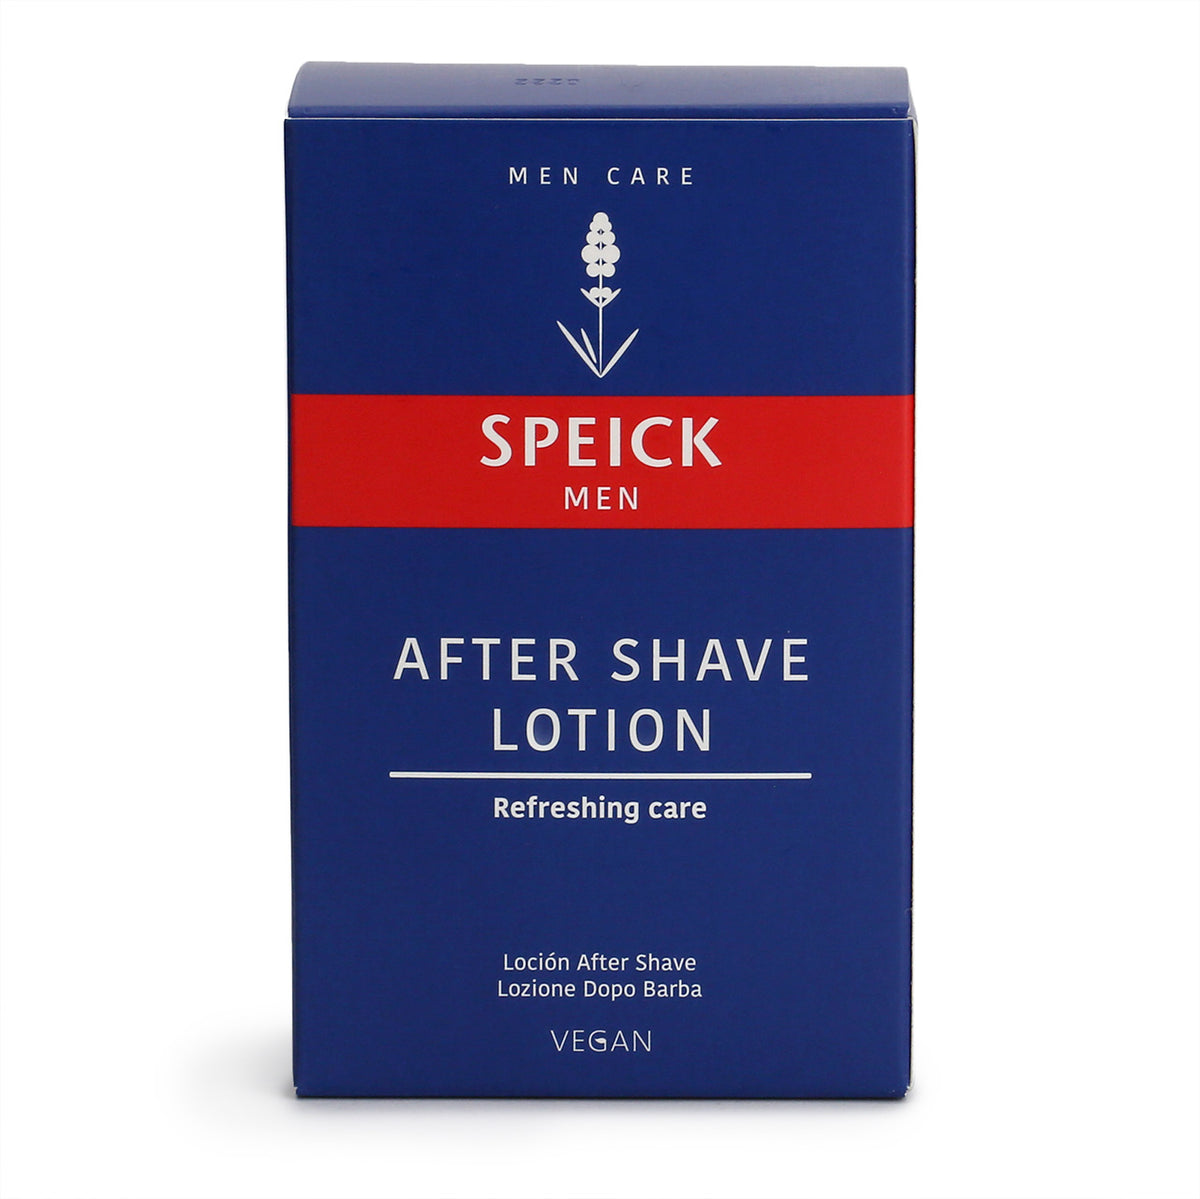 Speick Men After Shave Lotion box